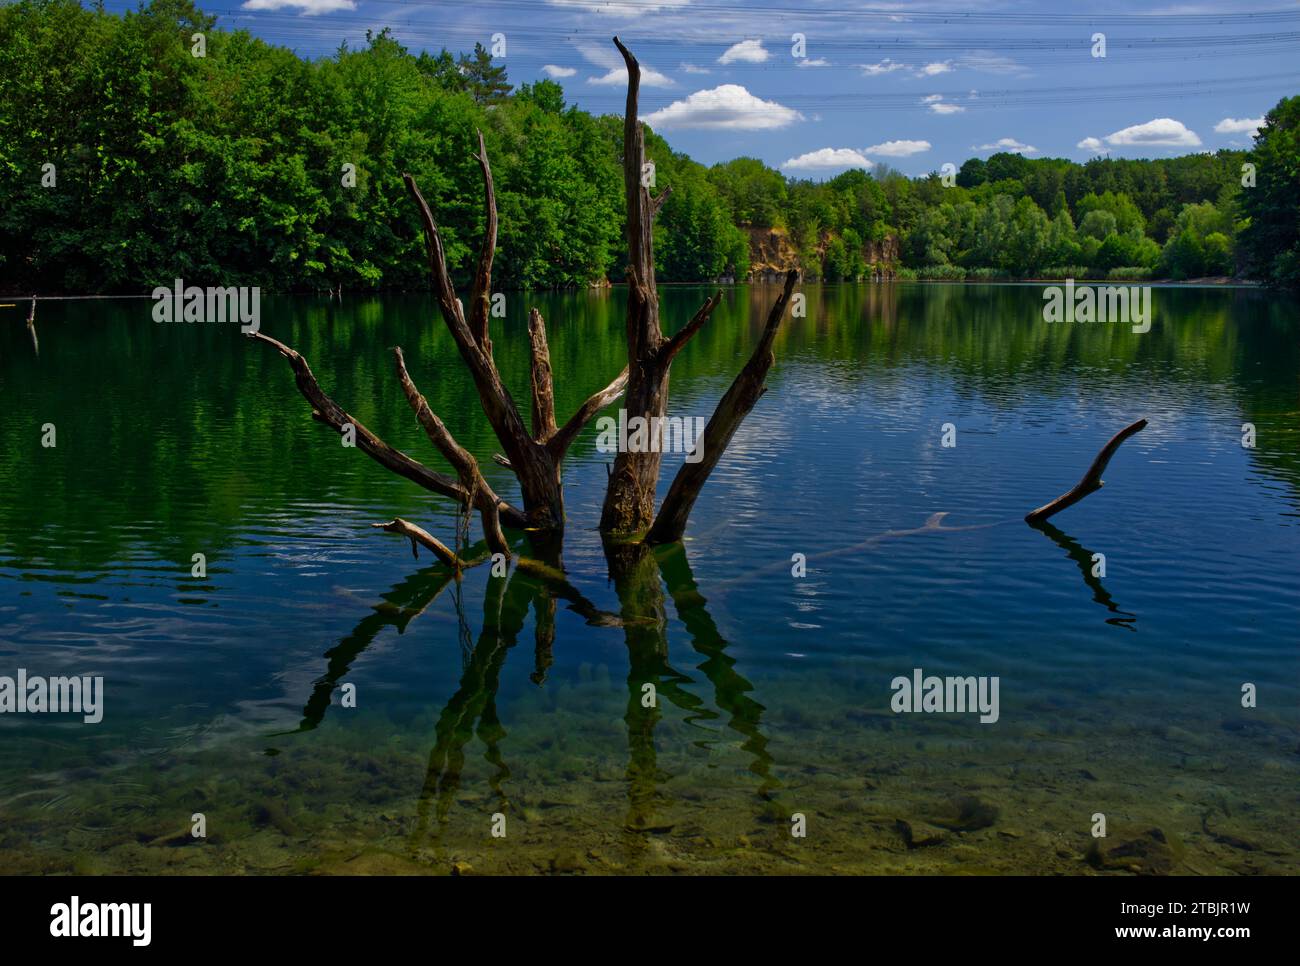 appealing scenery at a lakeshore of the Dietesheimer quarries (Mühlheim, Hesse, Germany) with some old tree trunks rising from the water Stock Photo